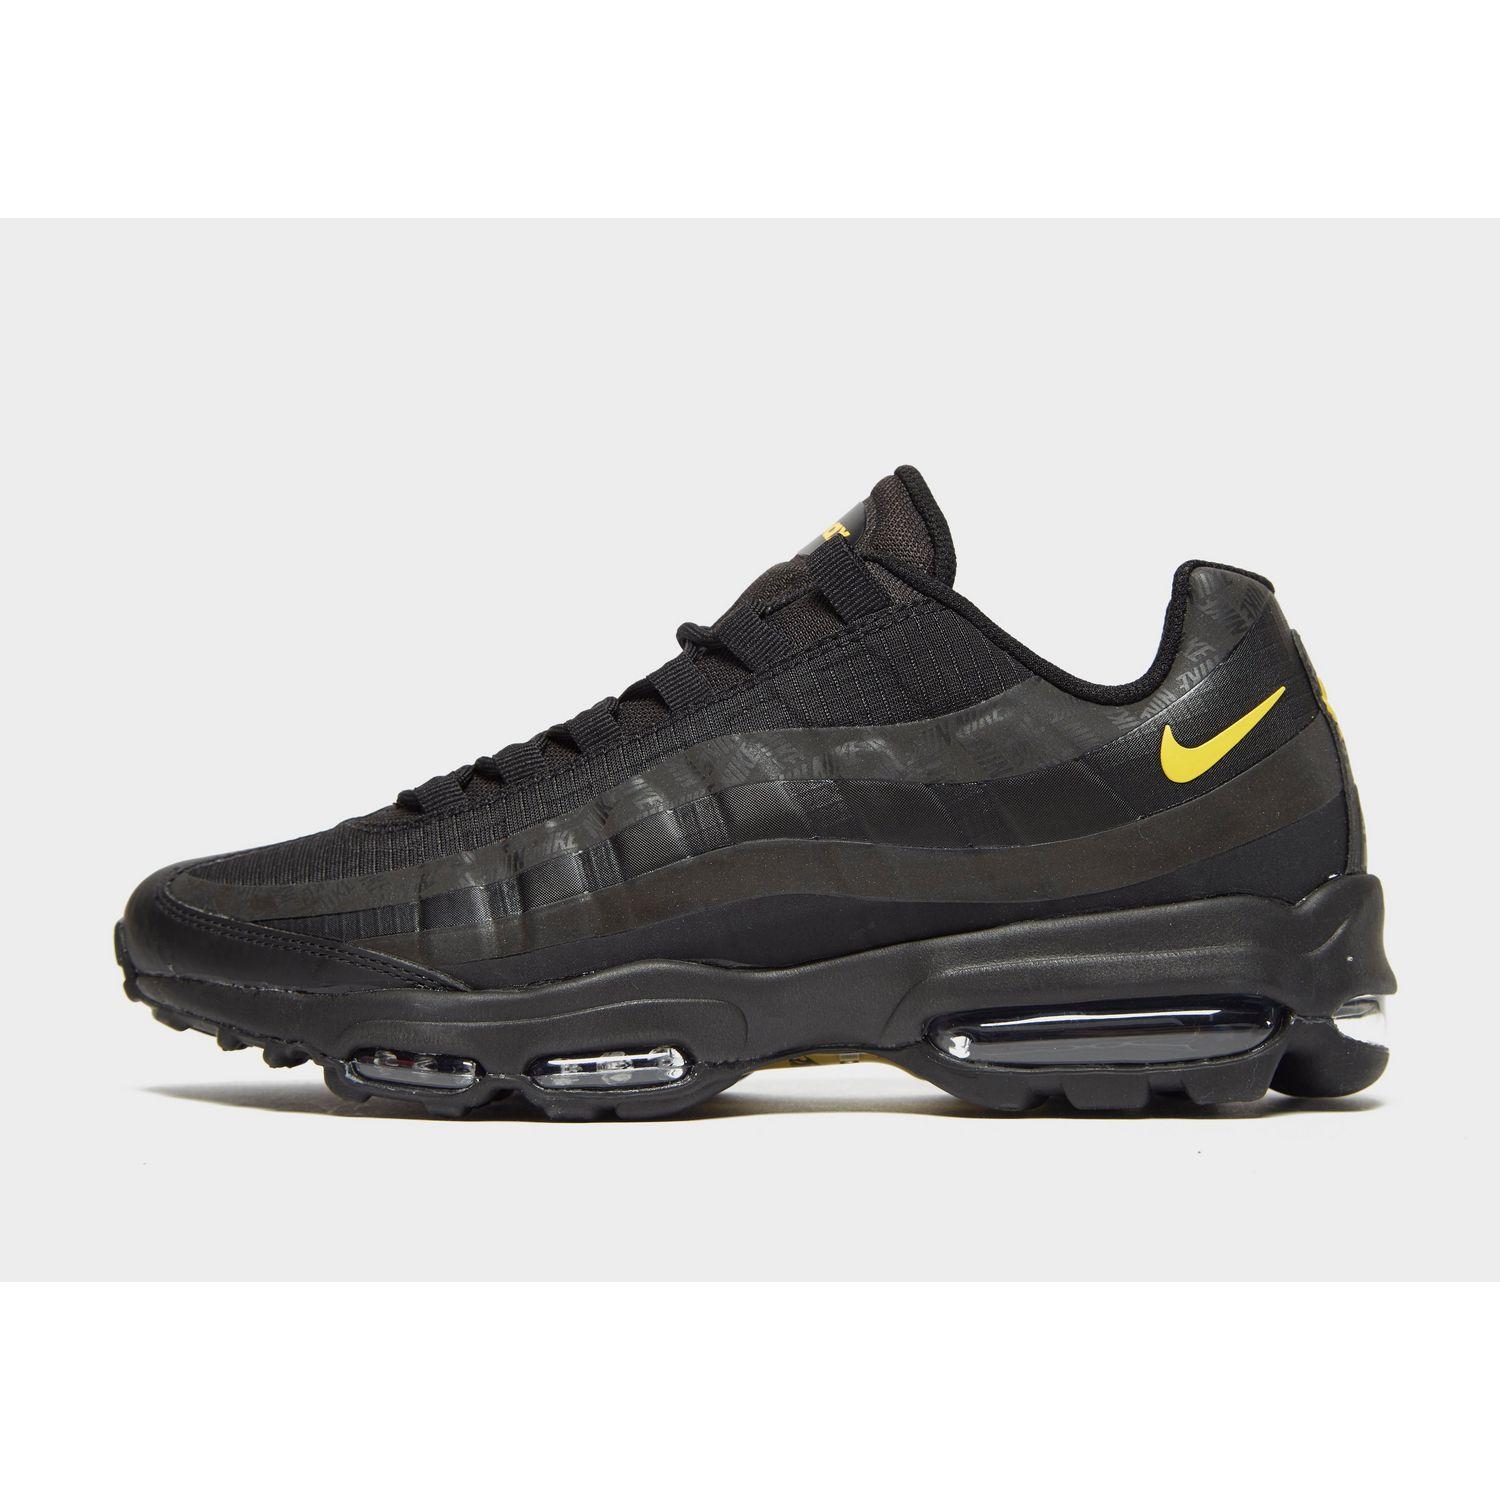 Nike Synthetic Air Max 95 Ultra Se in 